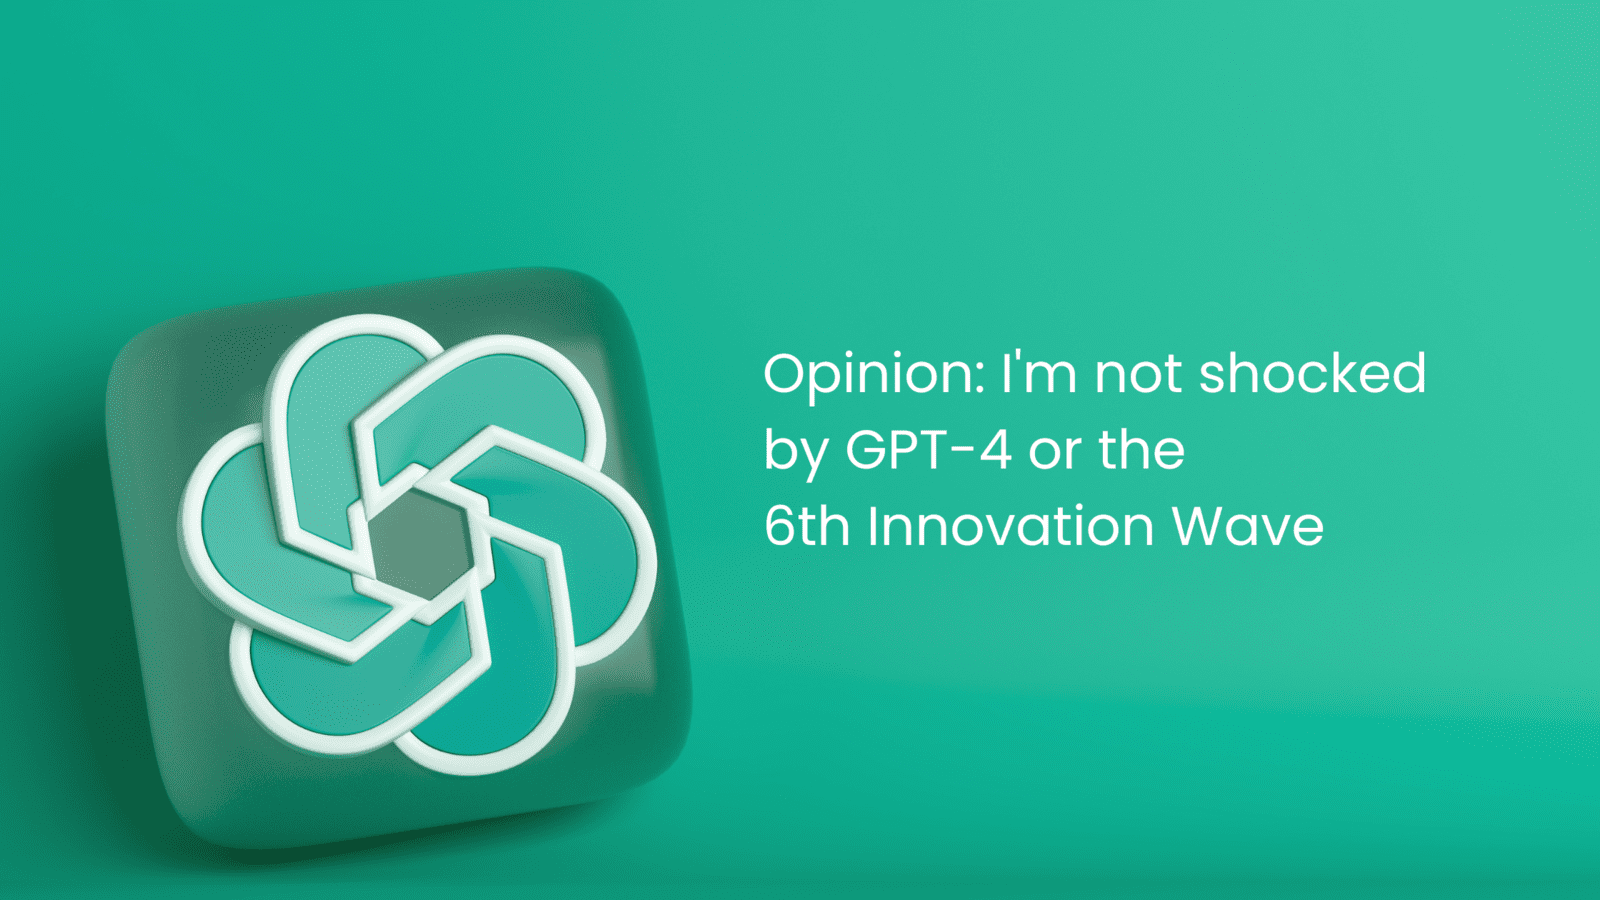 Opinion: I'm not shocked by GPT-4 or the 6th Innovation Wave